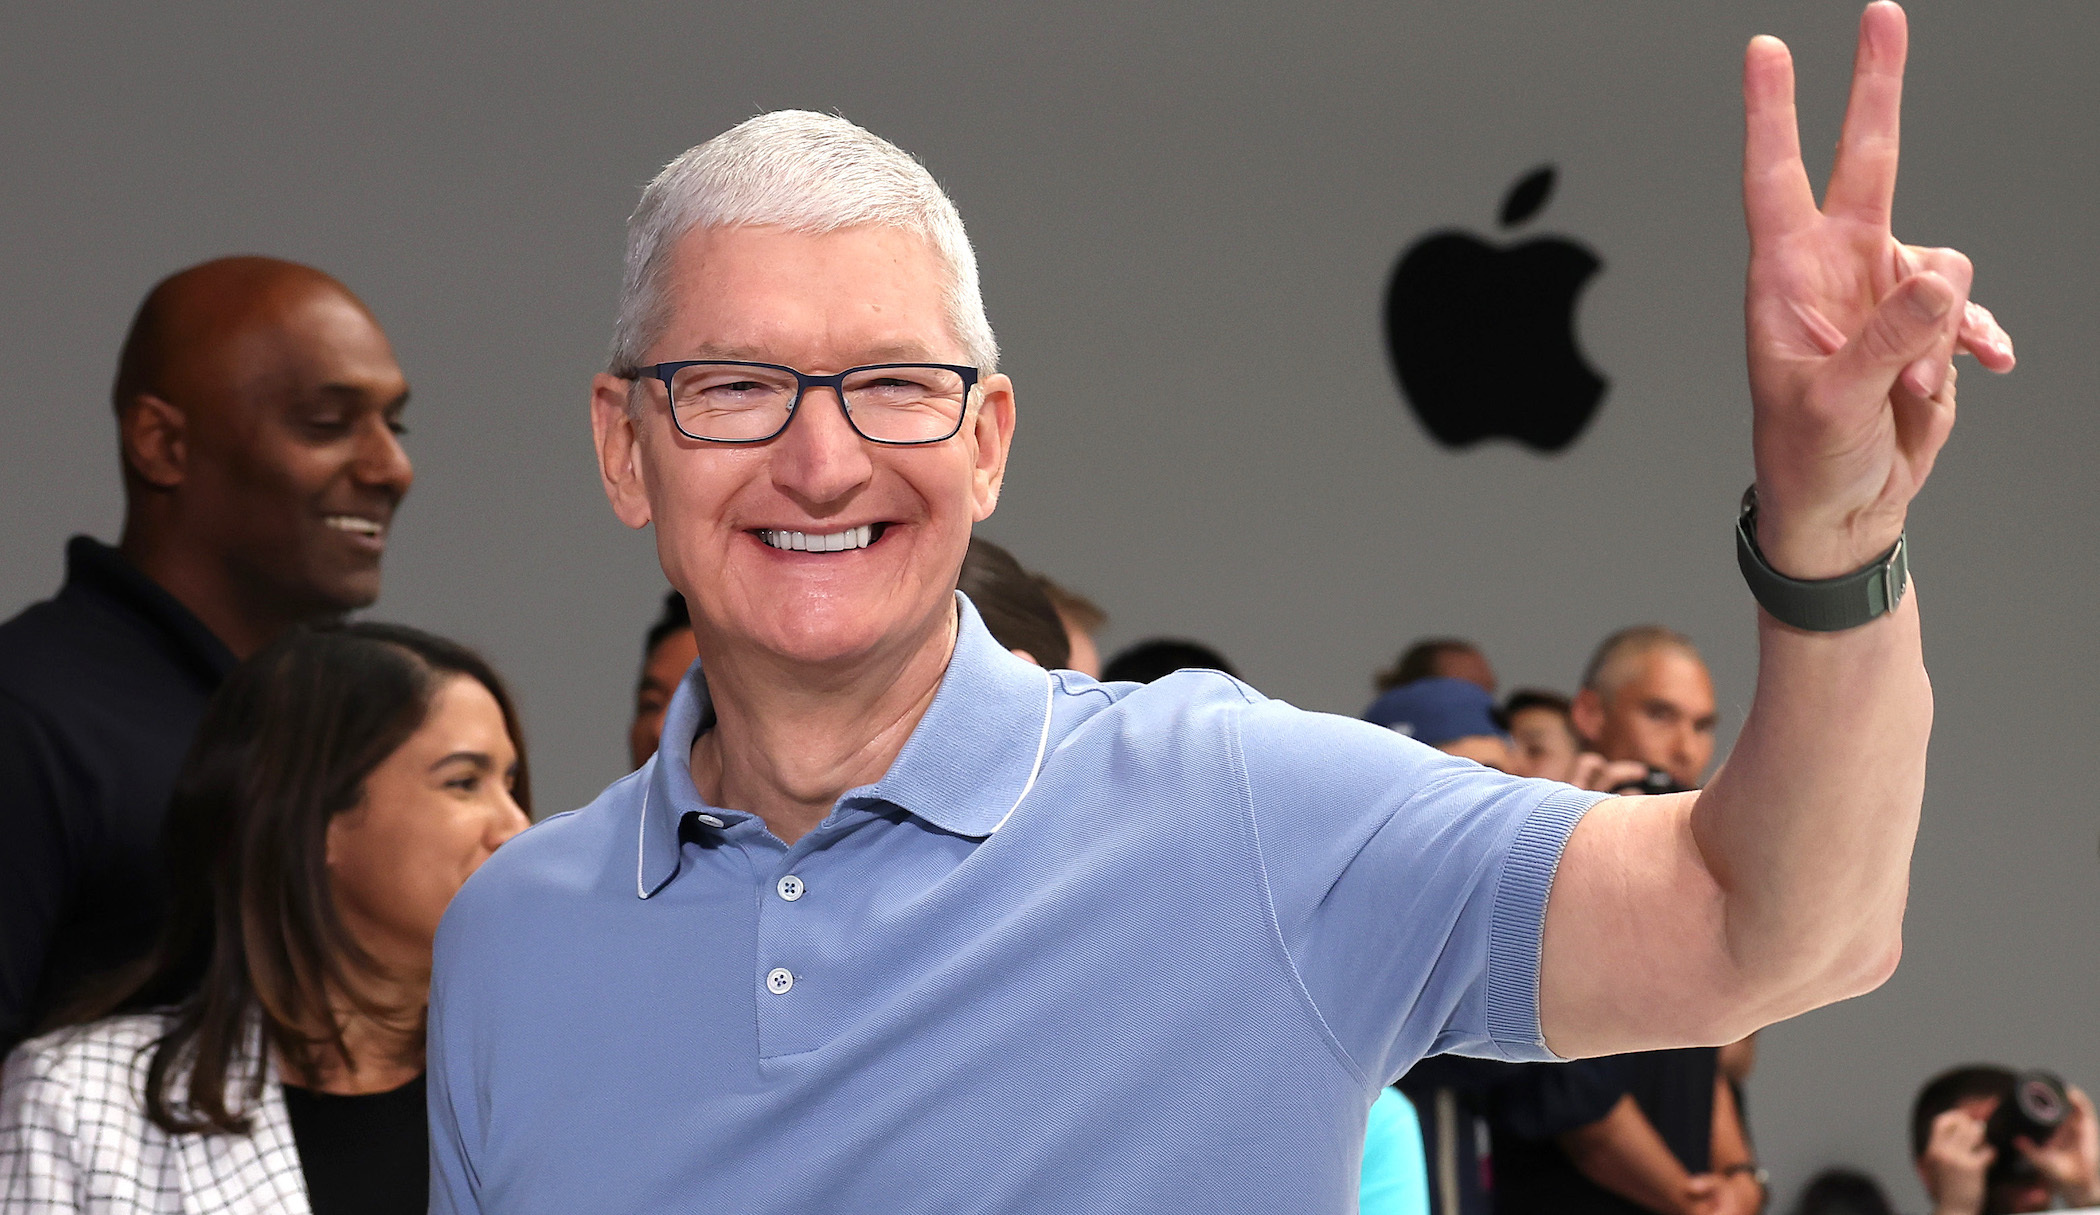 Tim Cook in front of an Apple logo flashing a peace sign